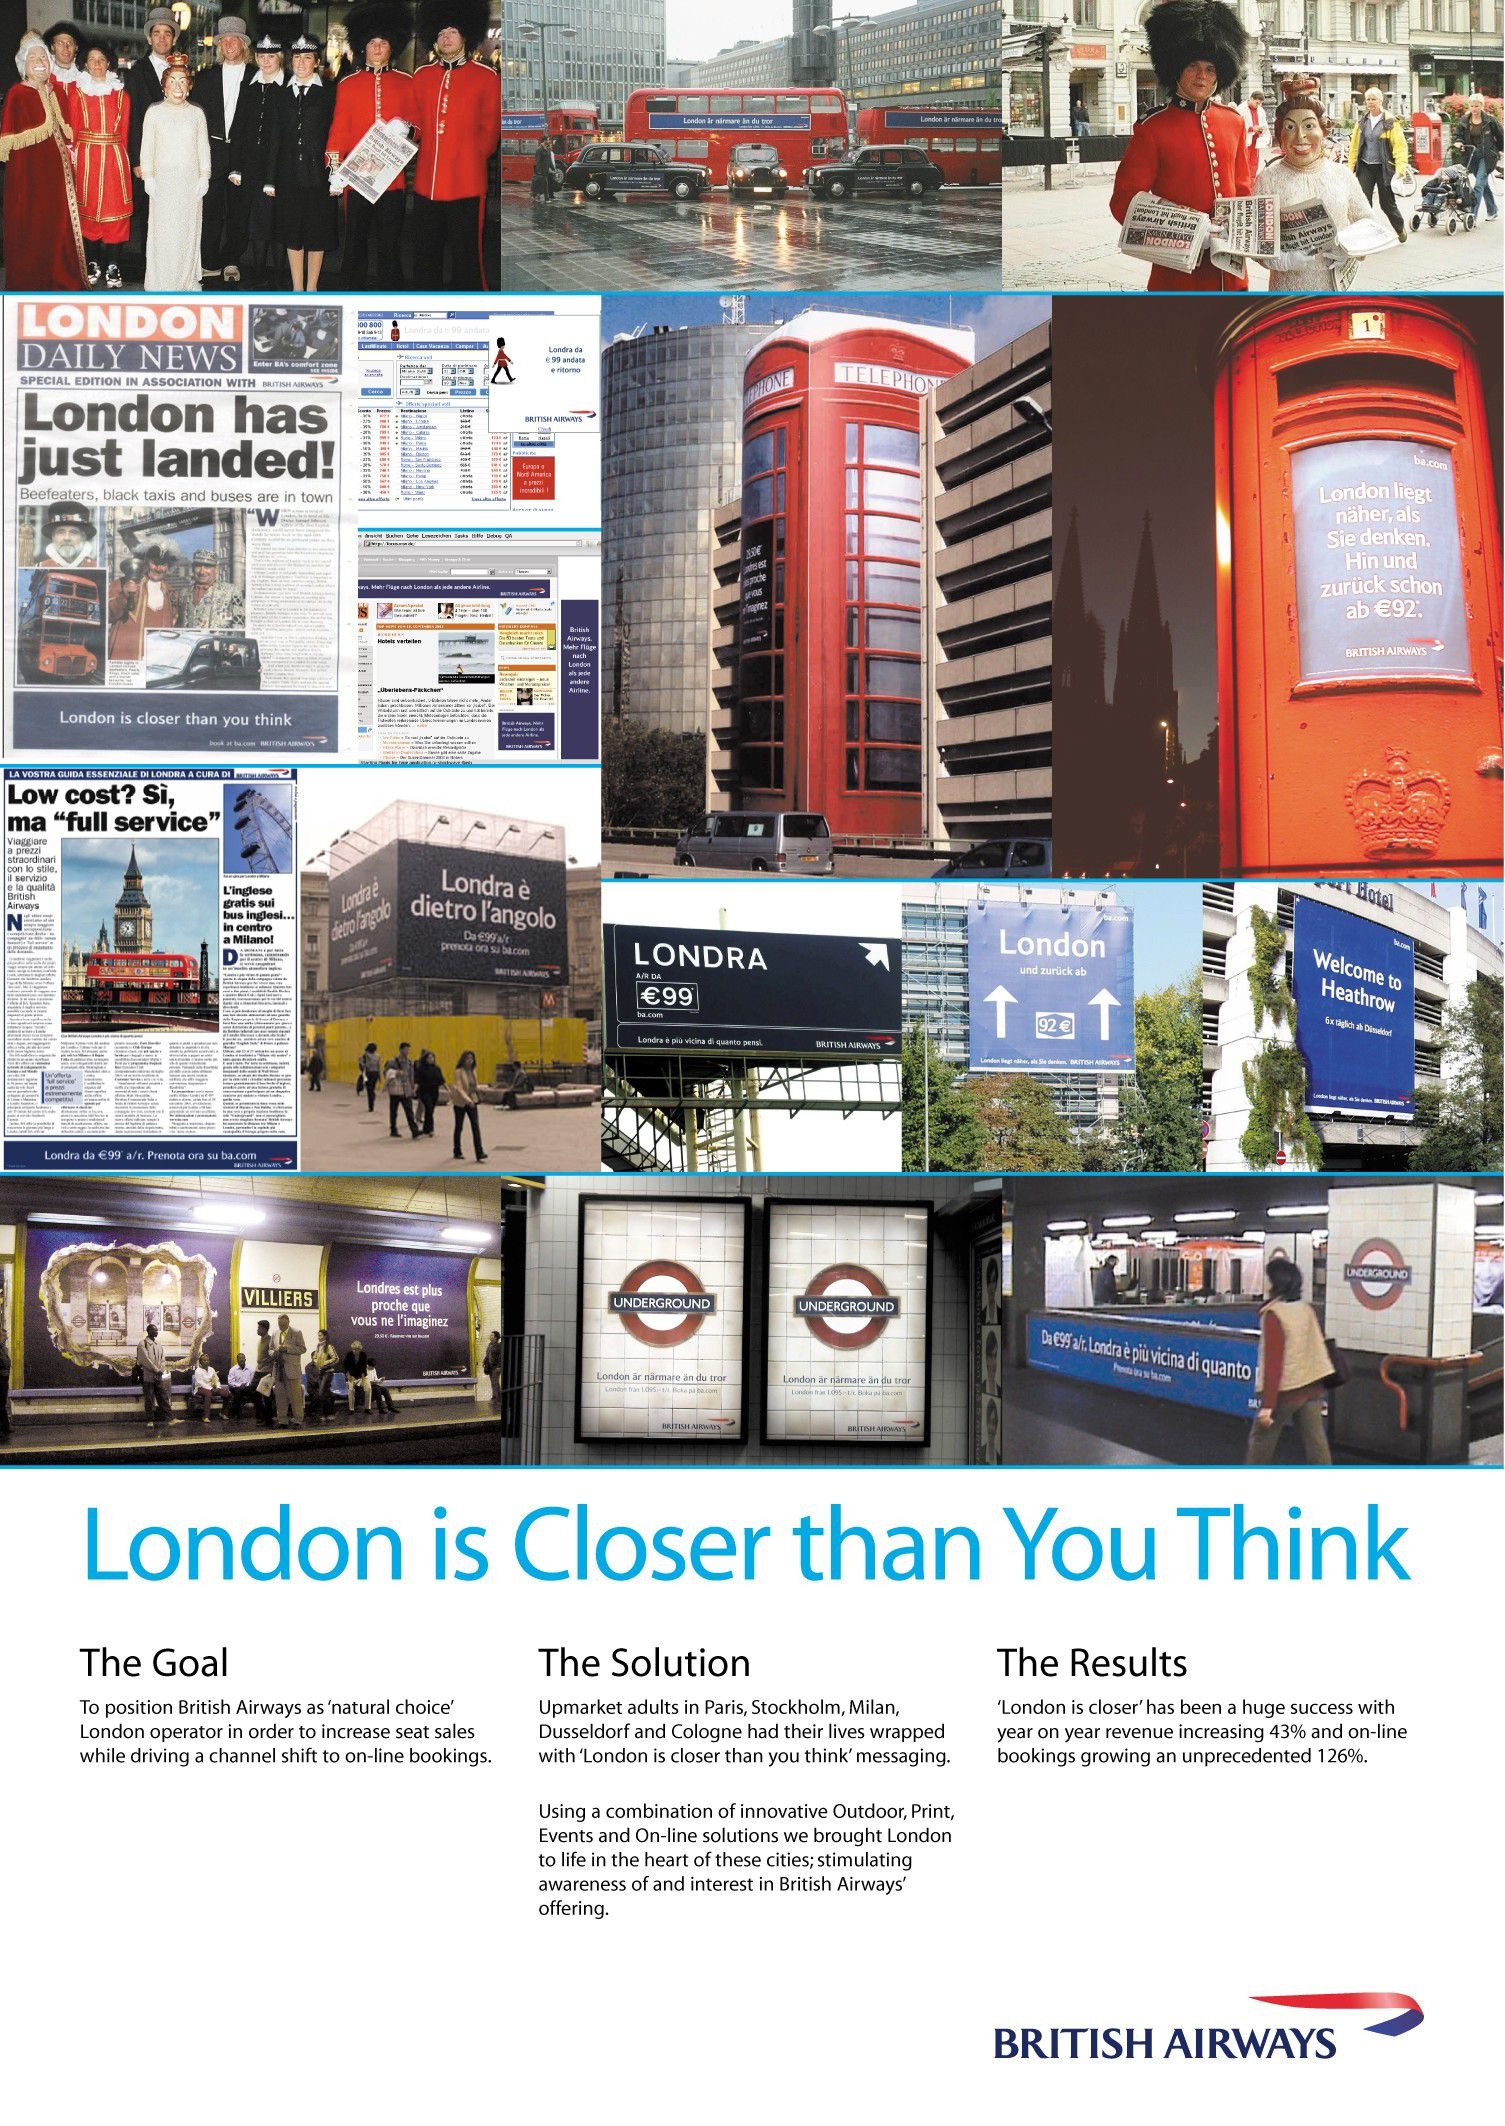 LONDON IS CLOSER THAN YOU THINK